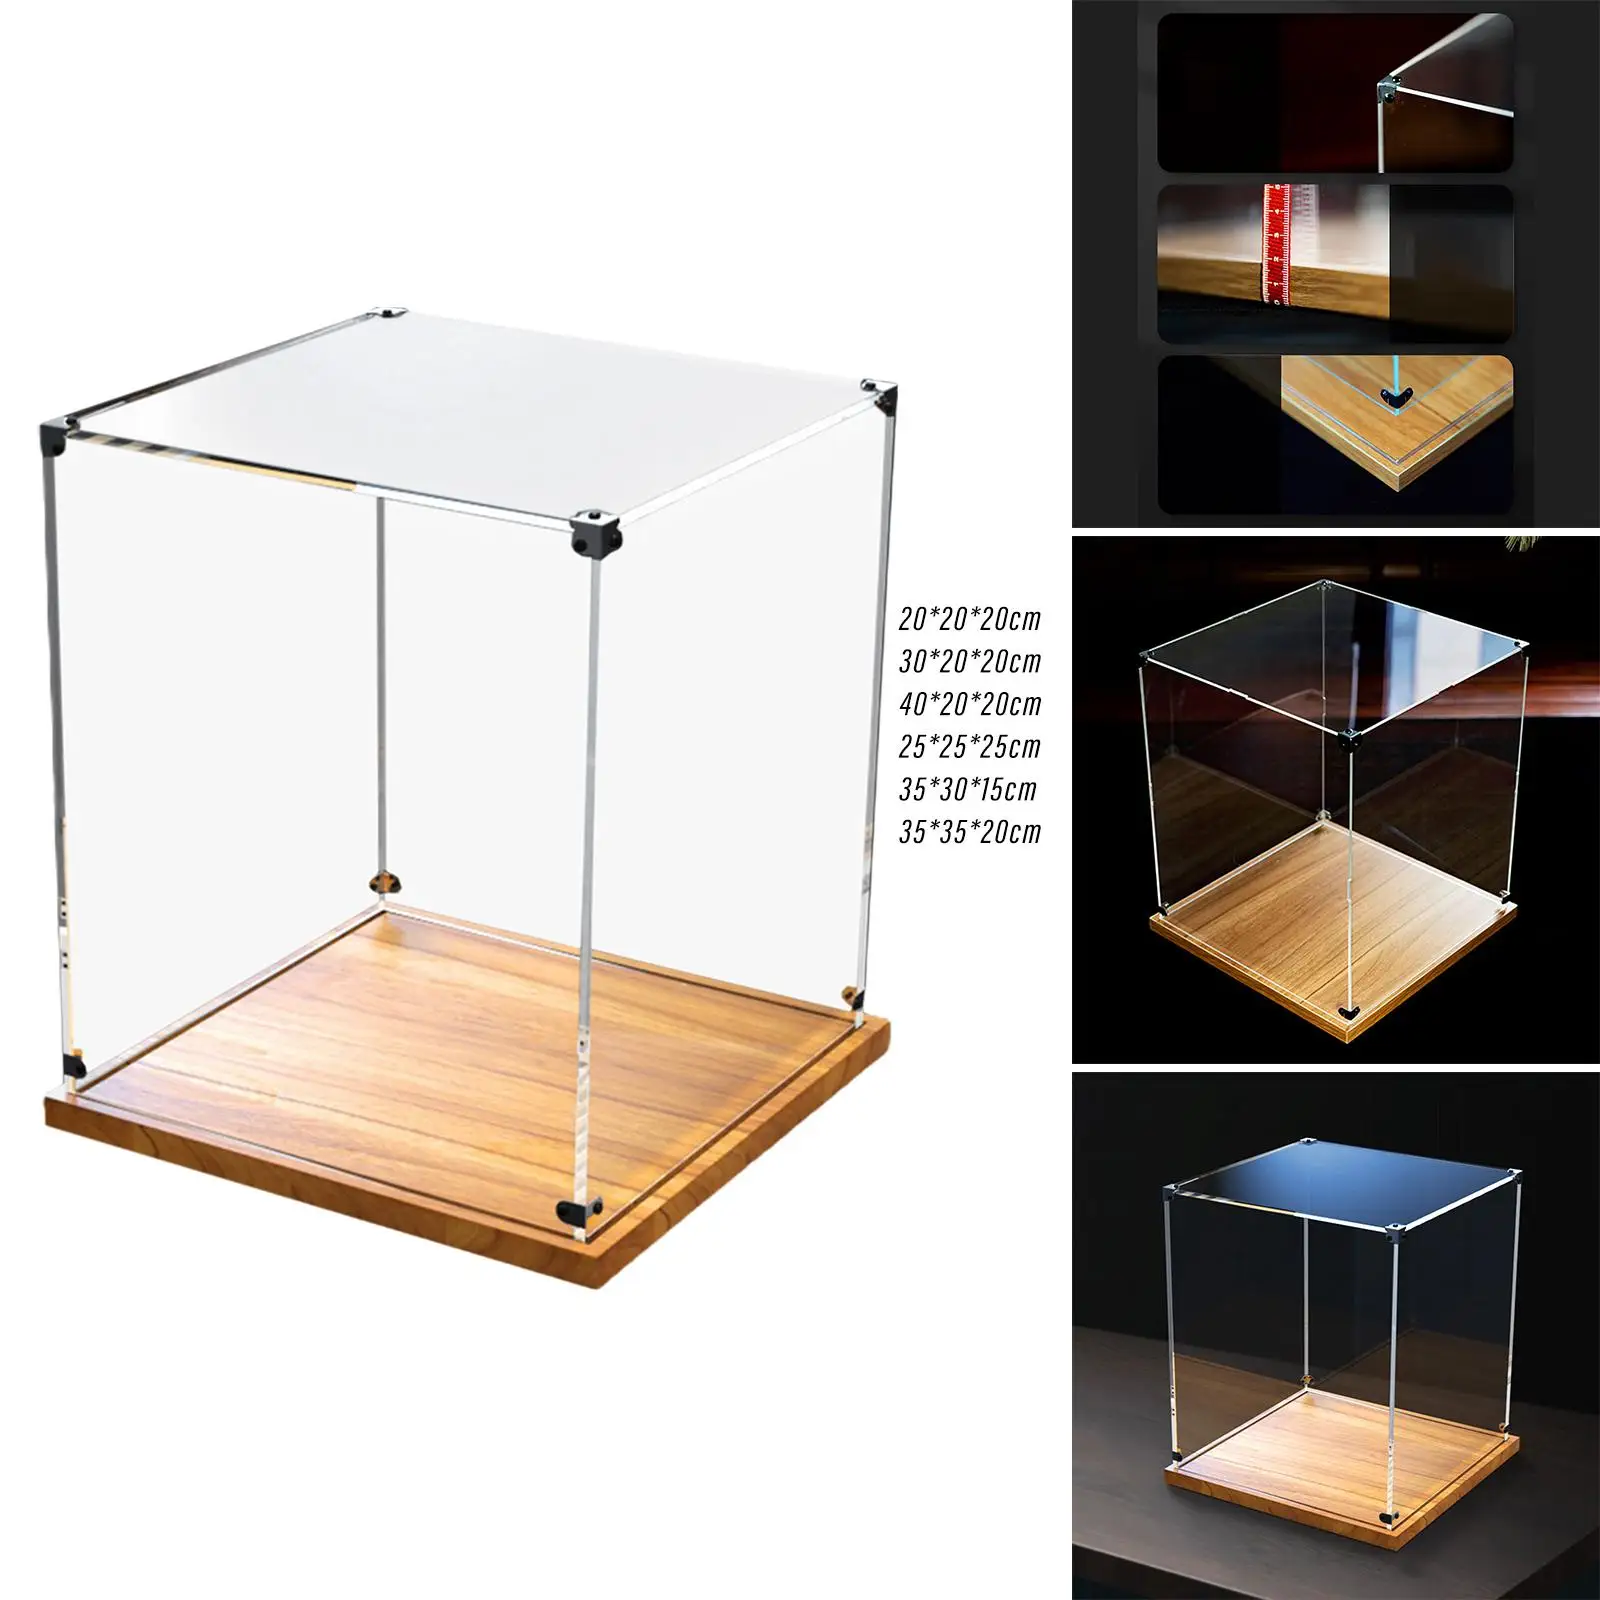 Acrylic Display Box Practical Multipurpose Stable Durable Decorative Transparent Showcase for Bookshelf Collectibles Model